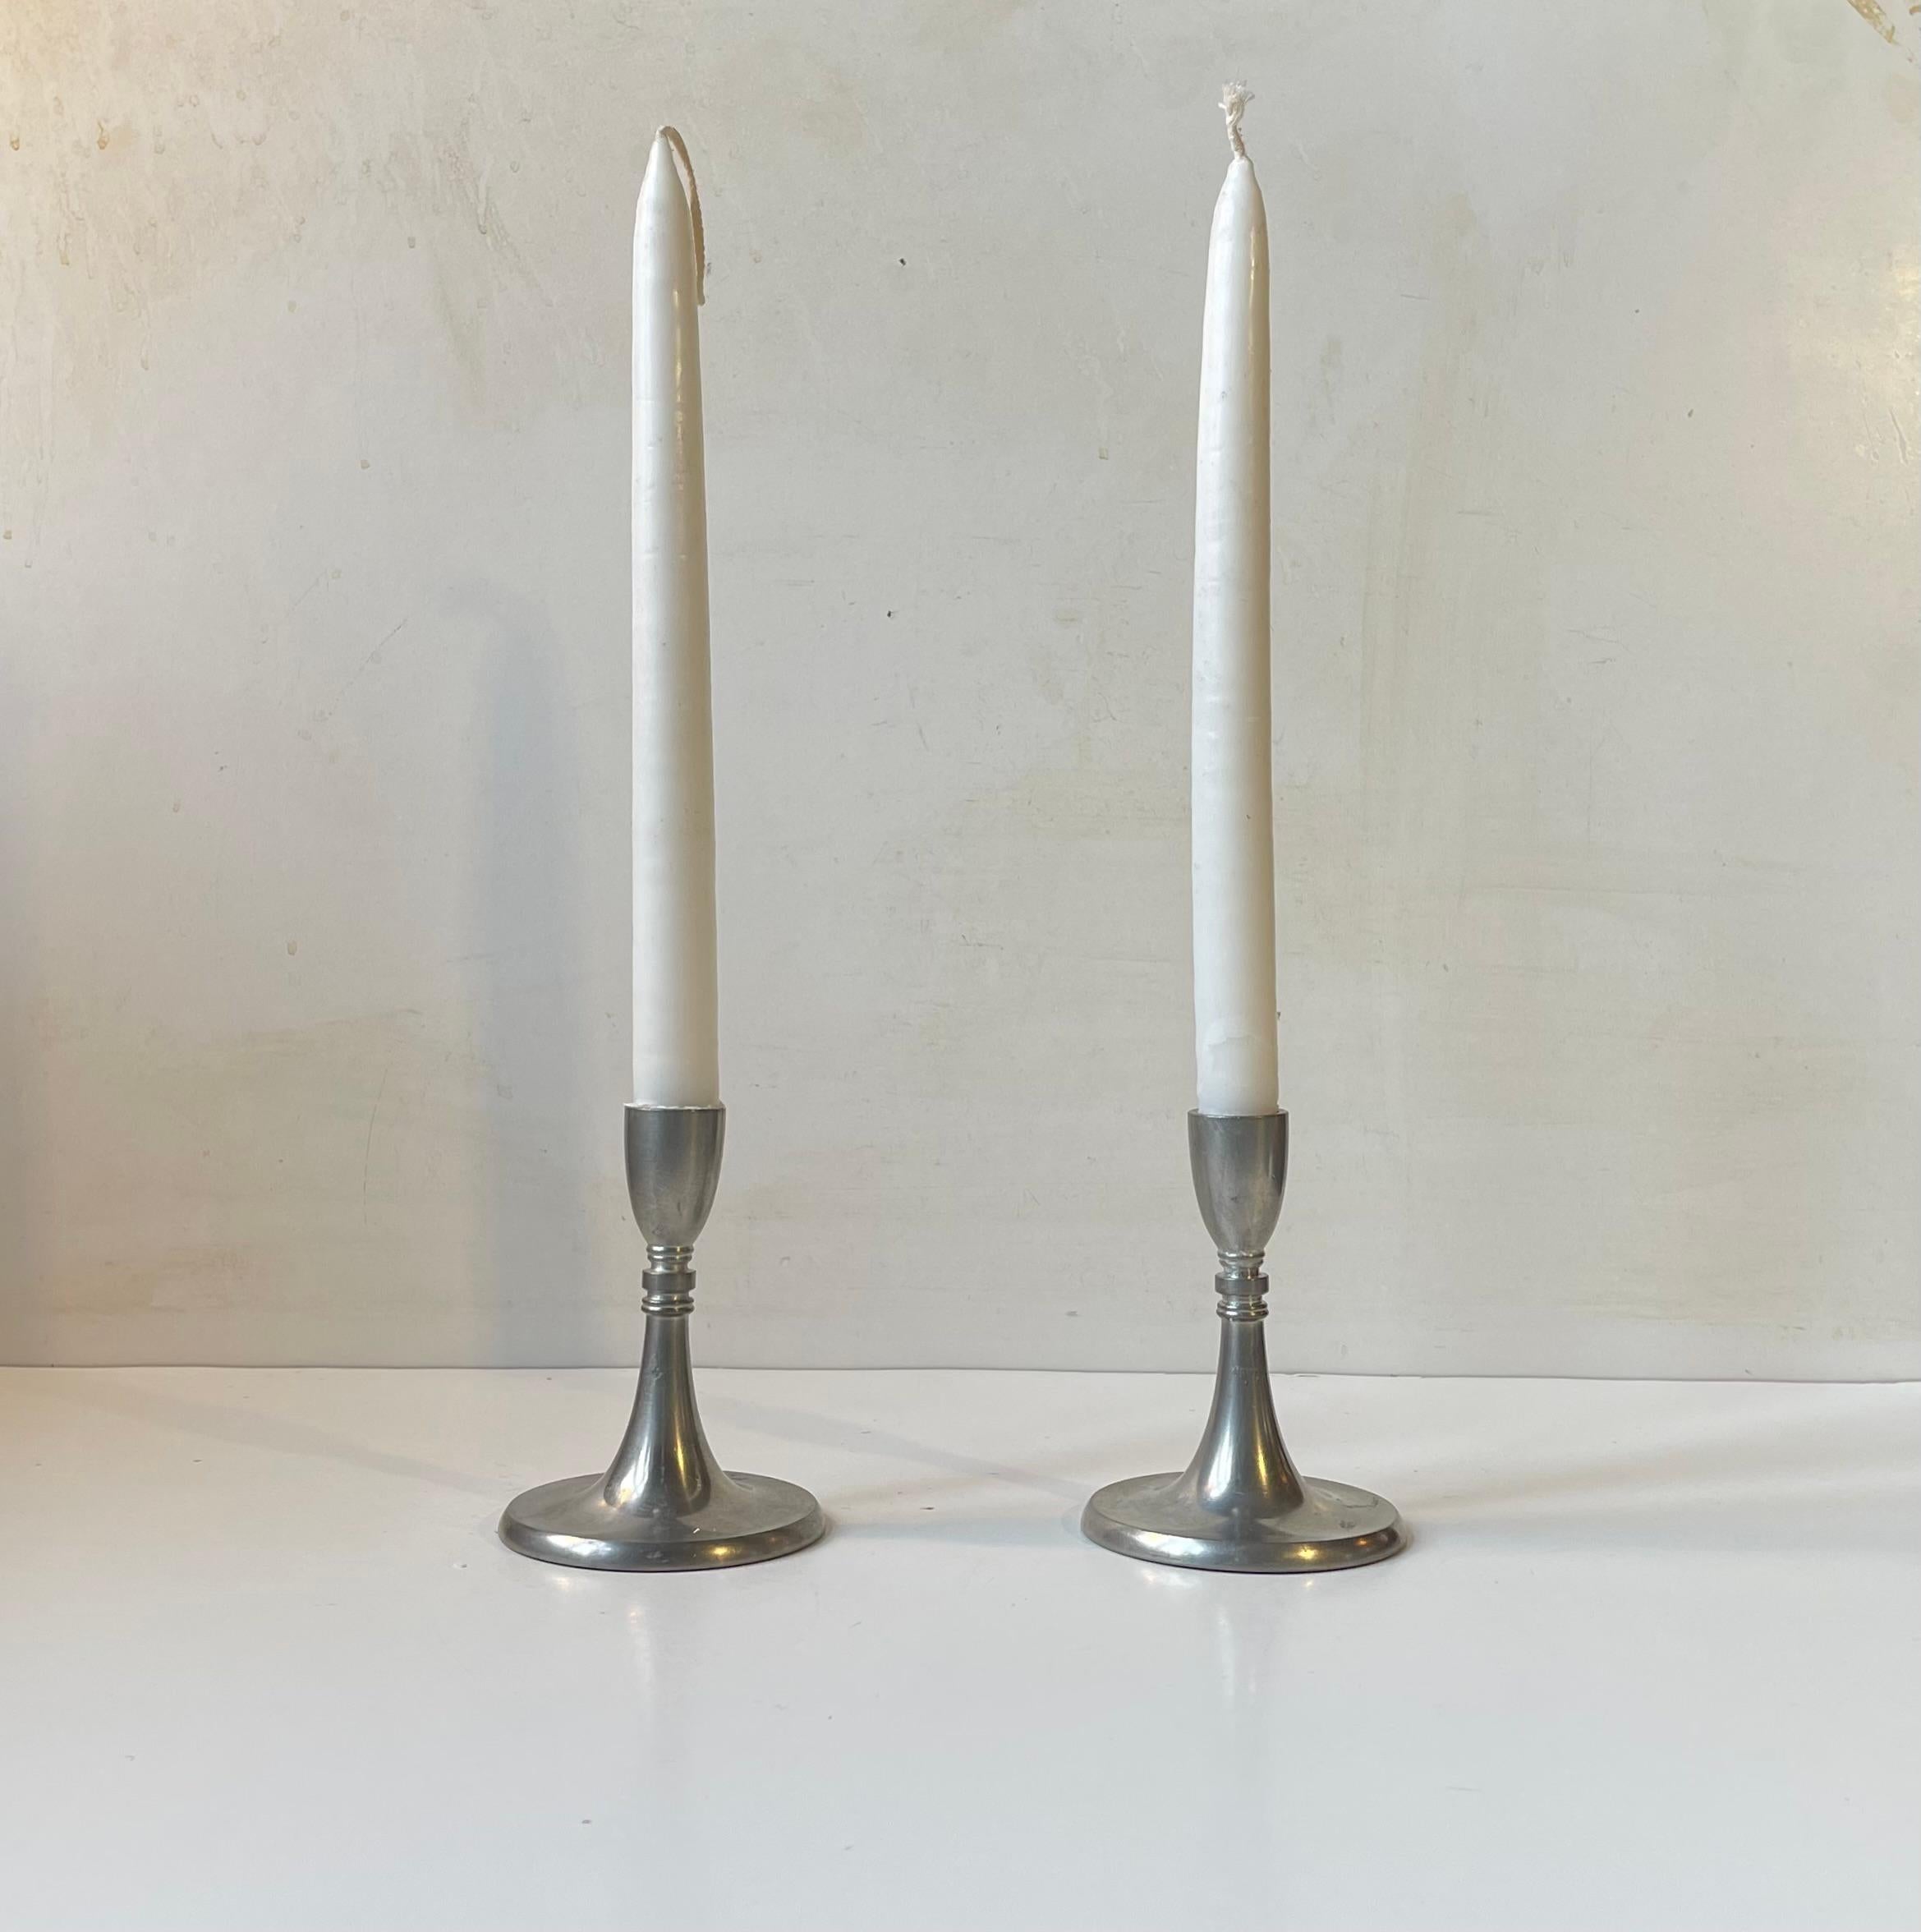 A pair of pewter Candlesticks designed by Just Andensen in Denmark during the 1930s or 1940s. Made from the finest pewter - Selangor pewter (hallmarked). Both stamped and signed by Just.. Suitable for regular sized candles. Measurements: H: 10,5 cm,